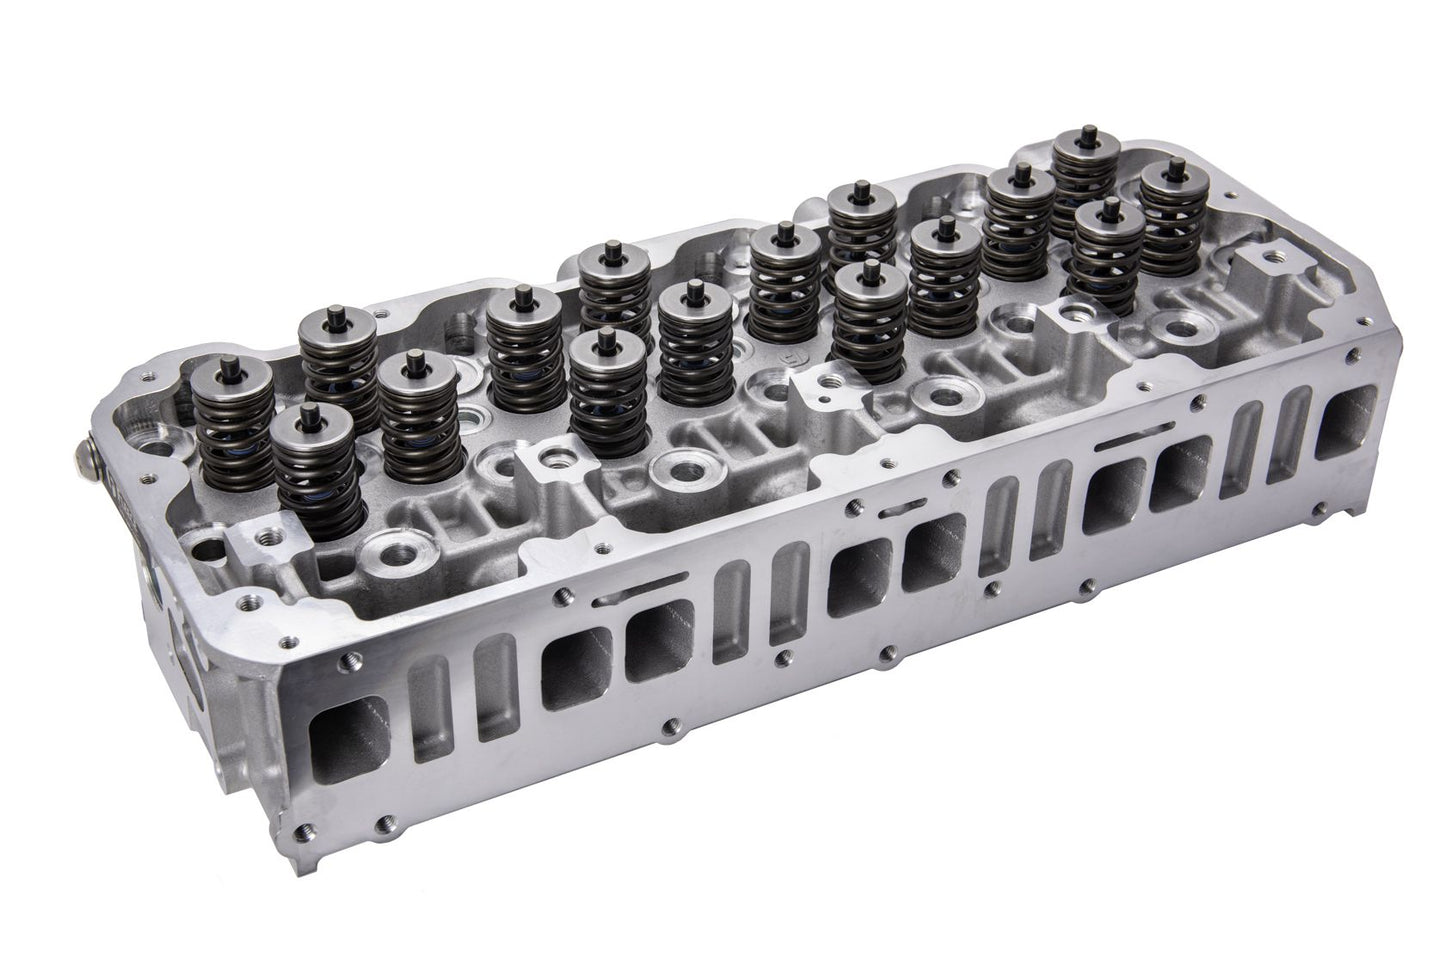 FPE-61-10001-D-CL Fleece / Freedom Series Duramax Cylinder Head with Cupless Injector Bore for 2001-2004 LB7 (Passenger Side) Hell On Wheels Canada